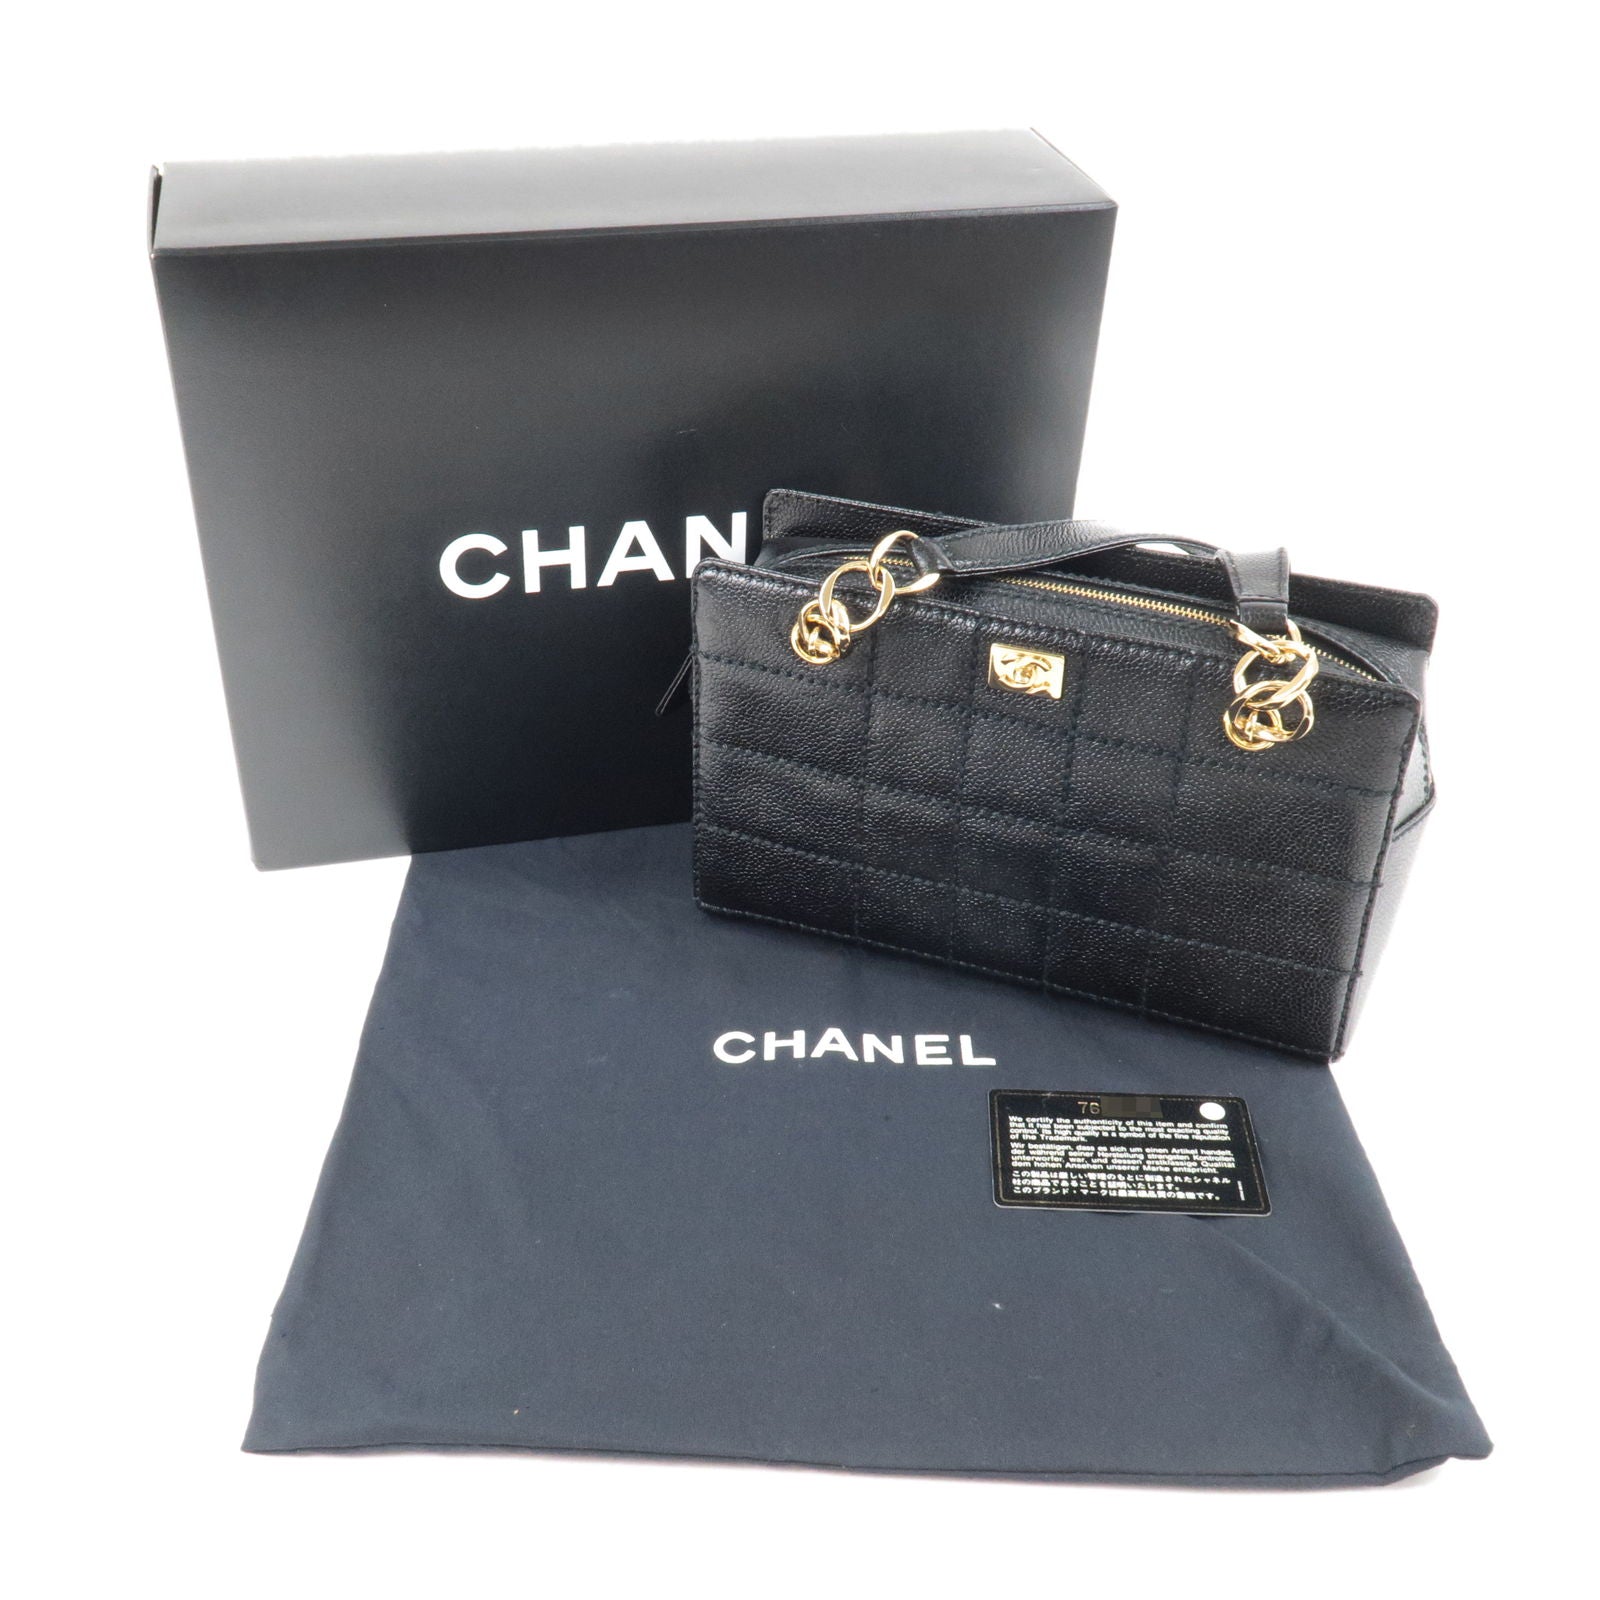 CHANEL Patent Leather Wallet on Chain Crossbody Bag Beige